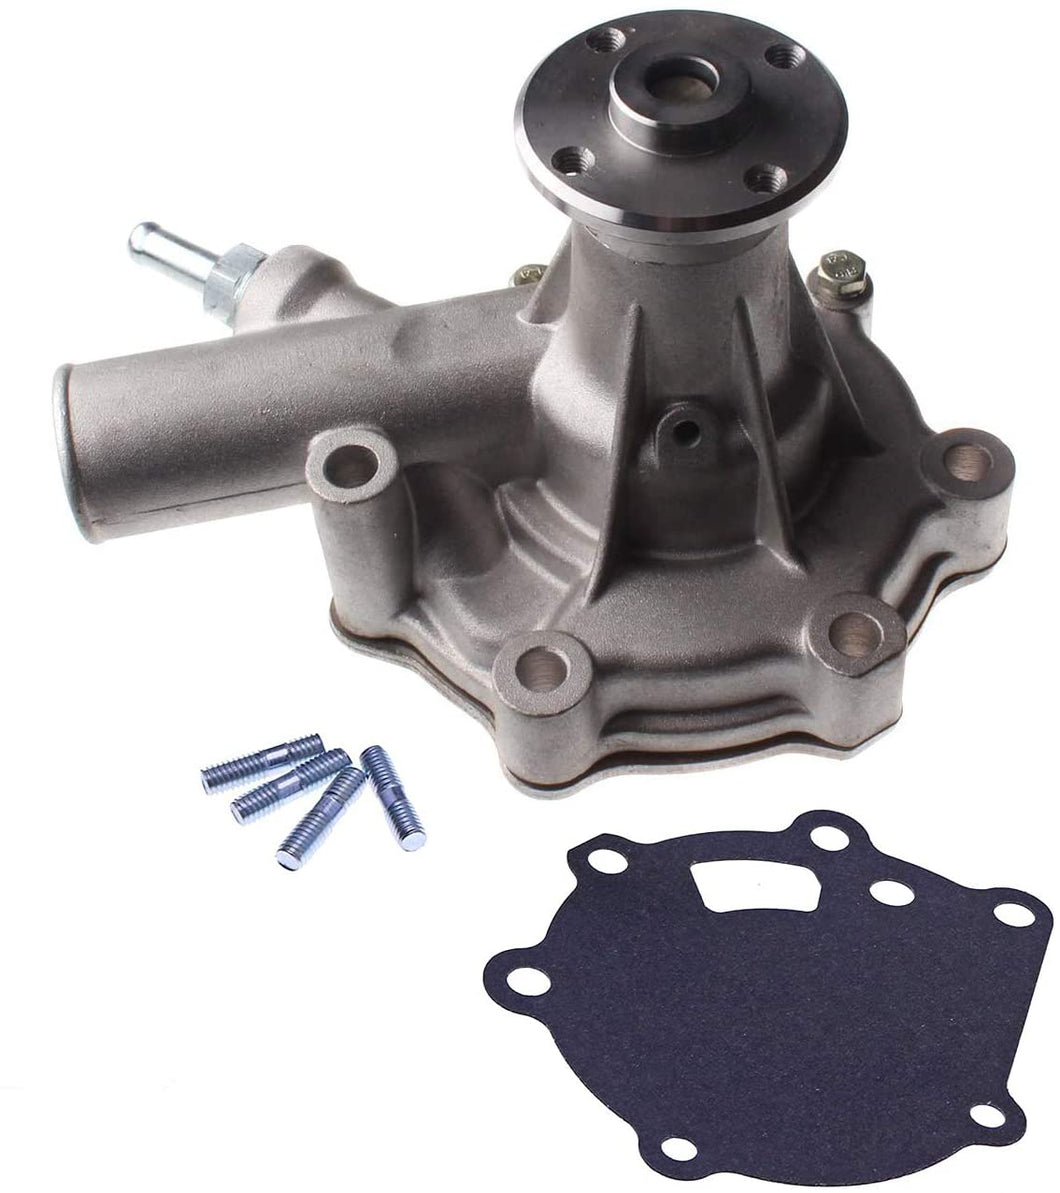 Case Tractor Water Pump | Fits Models 234, 235, 244, 245, 254, 255, 1120, 1130 | Replaces 1273085C91